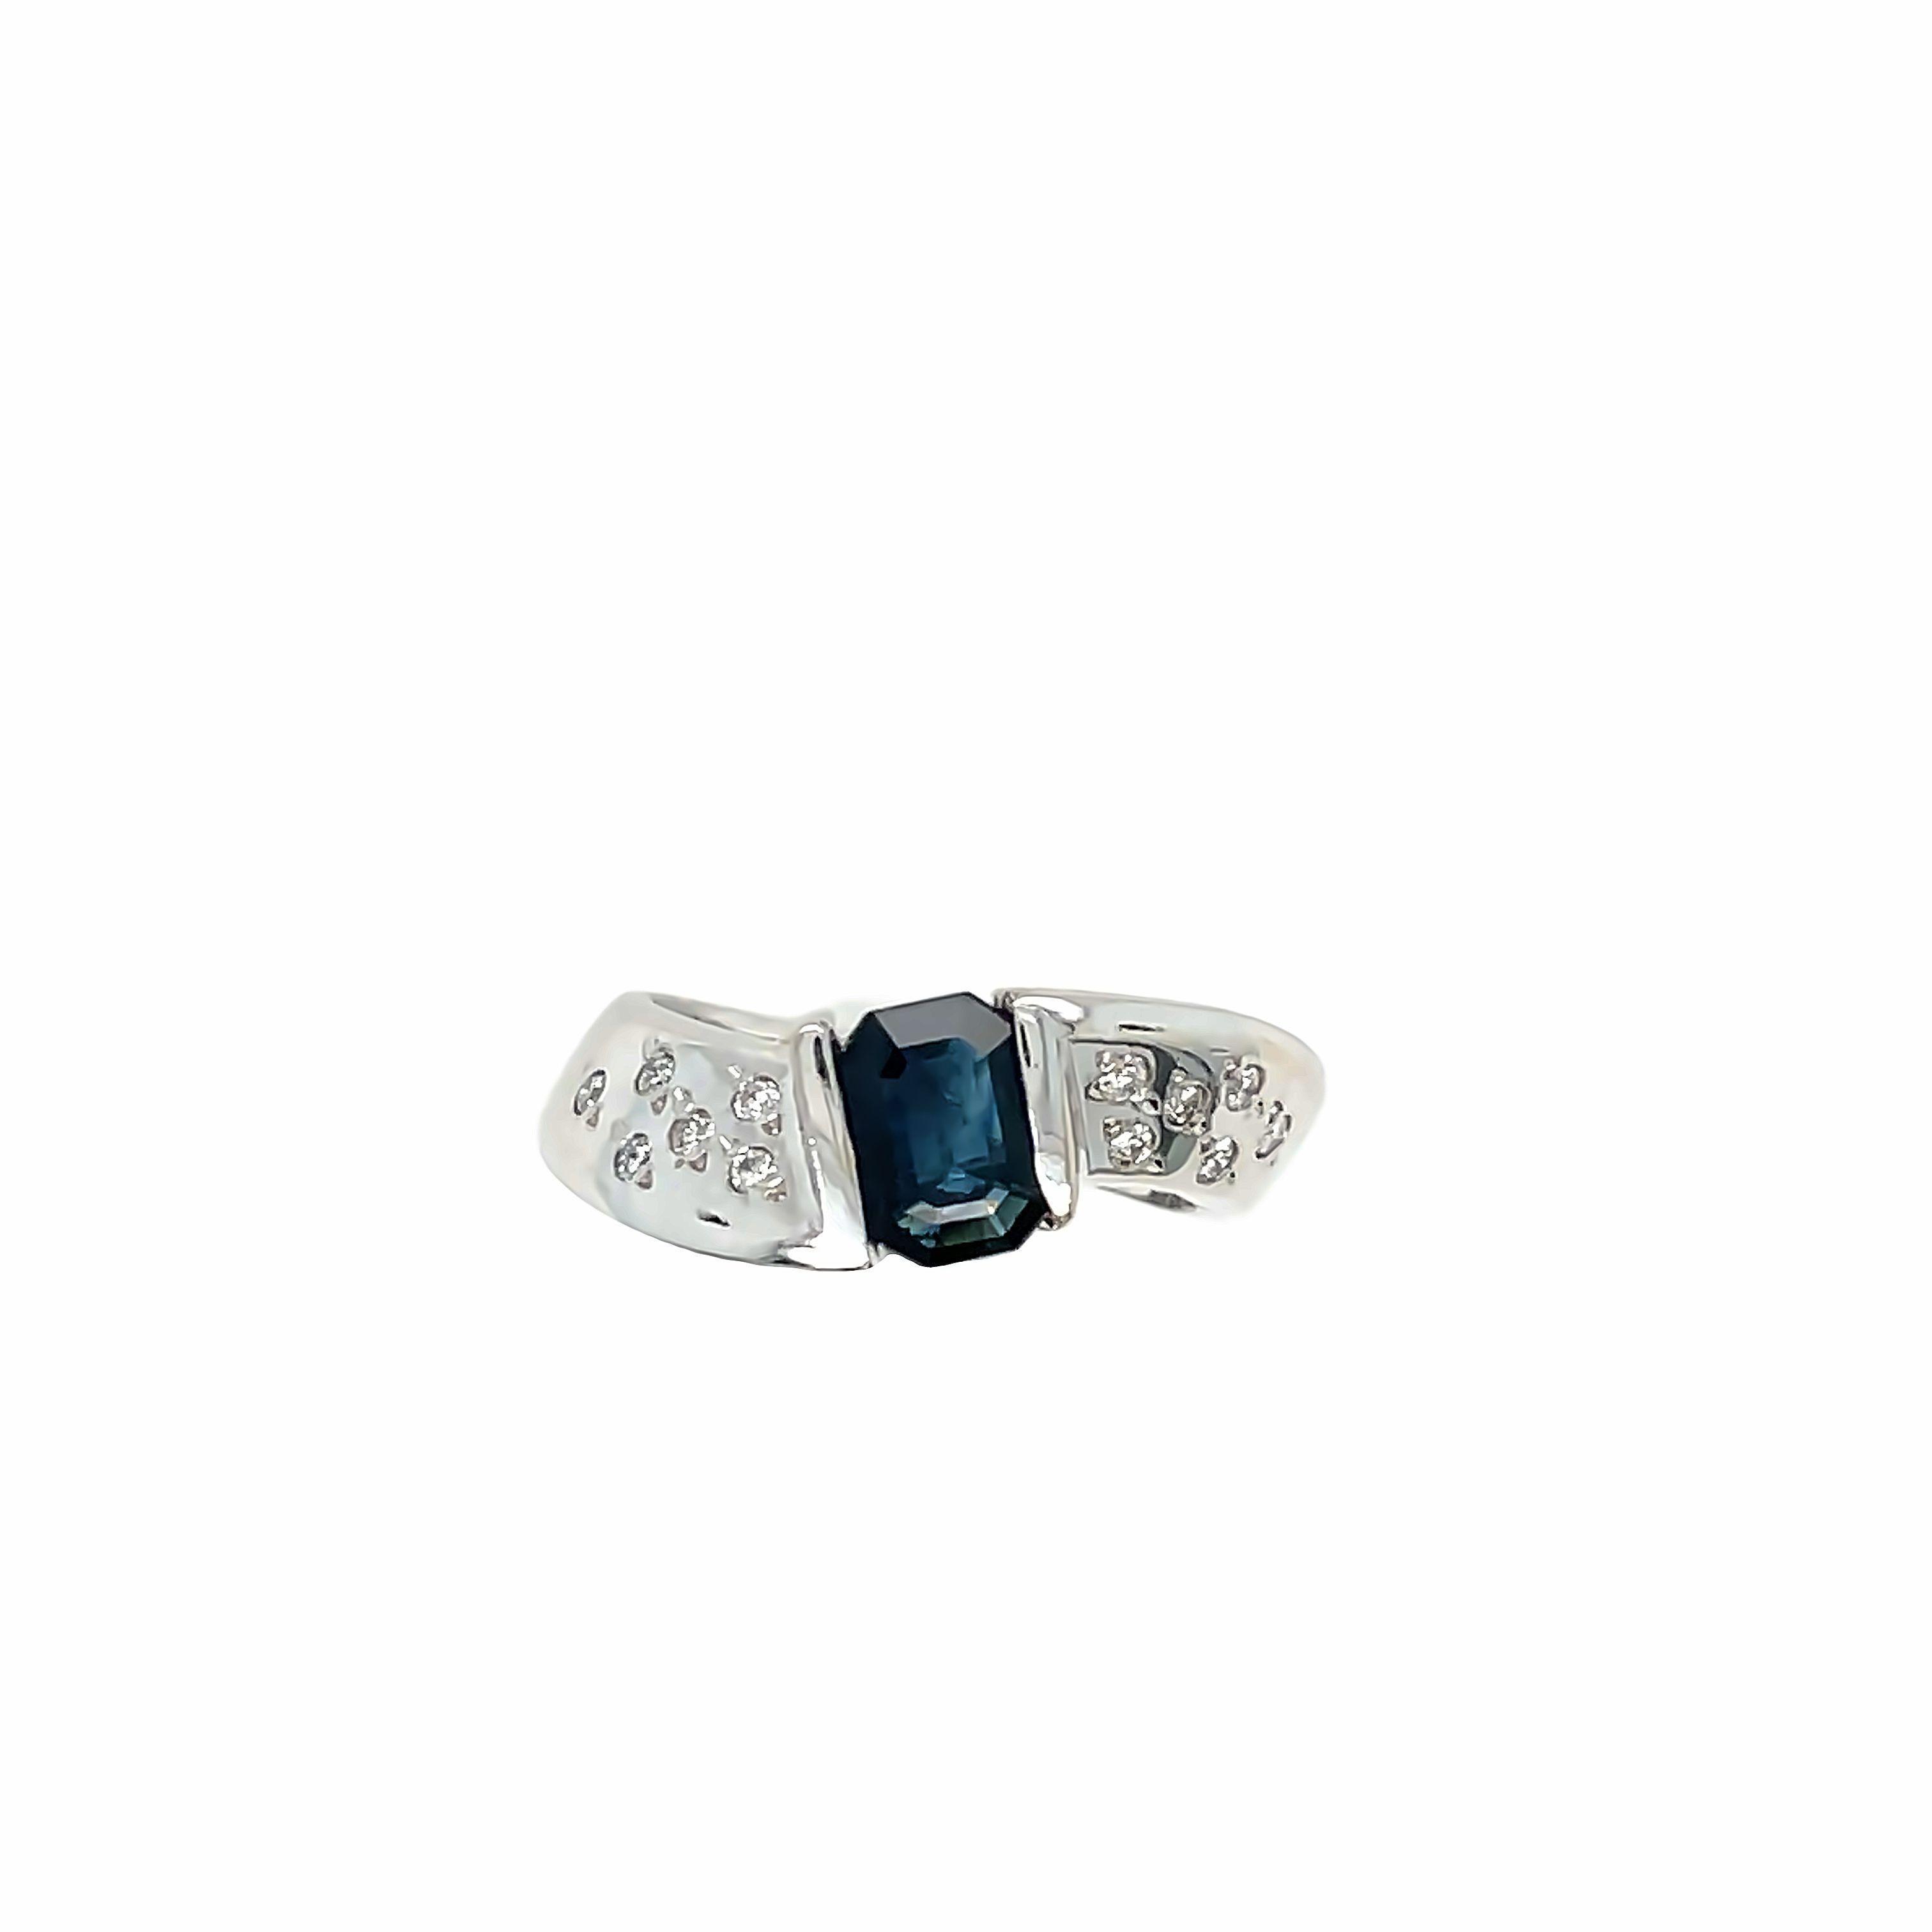 Emerald Cut Sapphire and Diamond Swirl Ring 14k White Gold For Sale 2